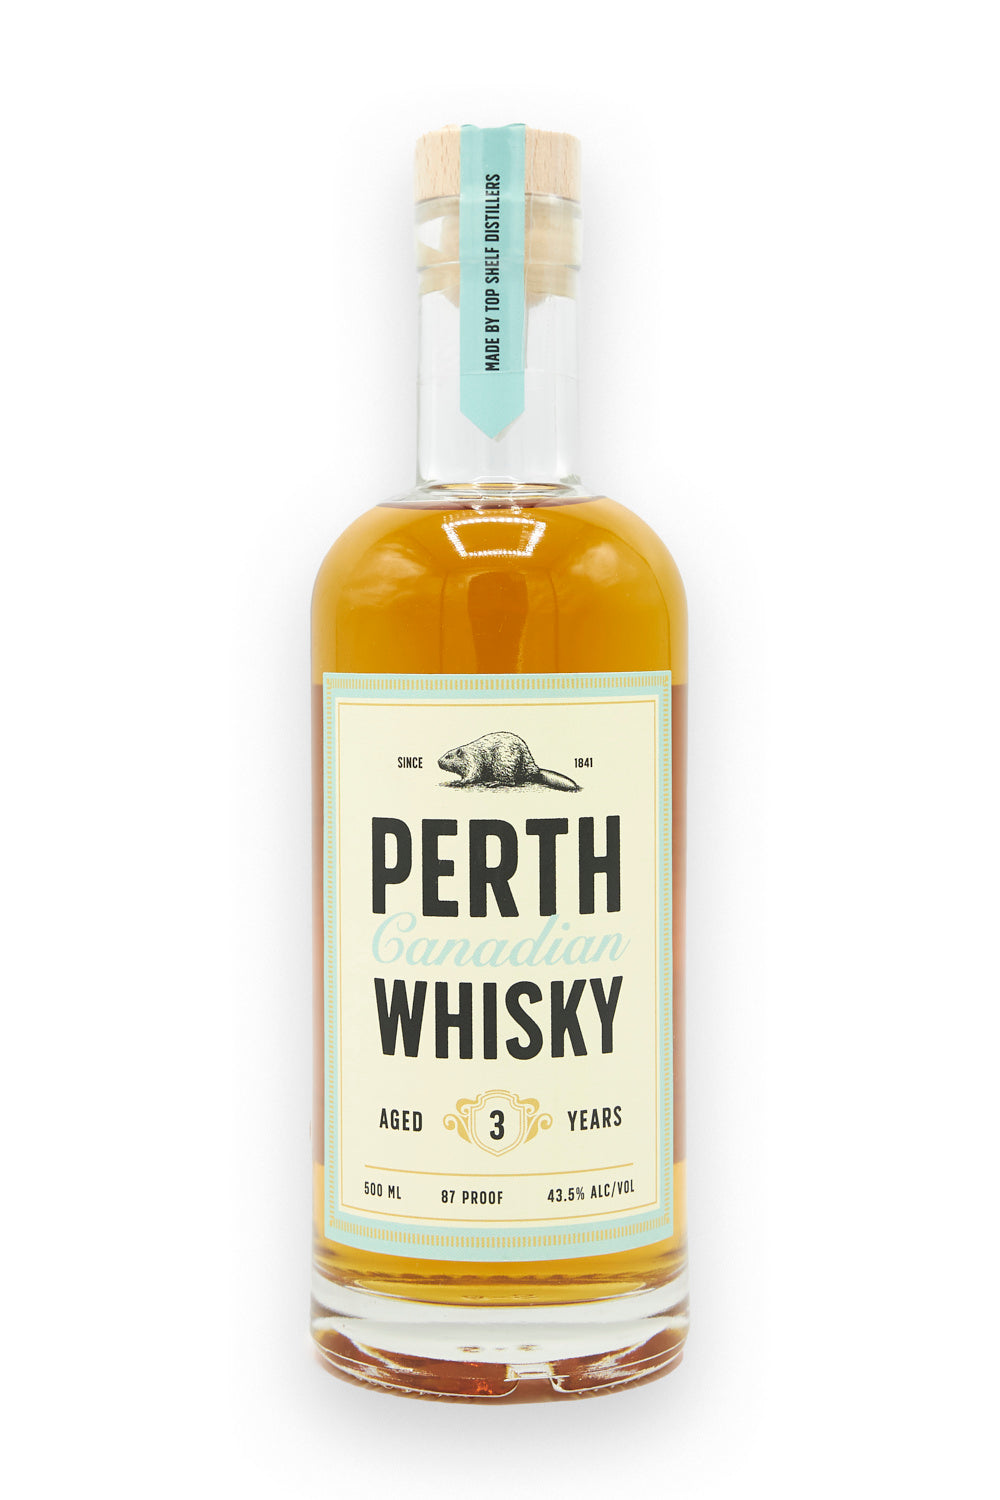 Perth Canadian Whisky